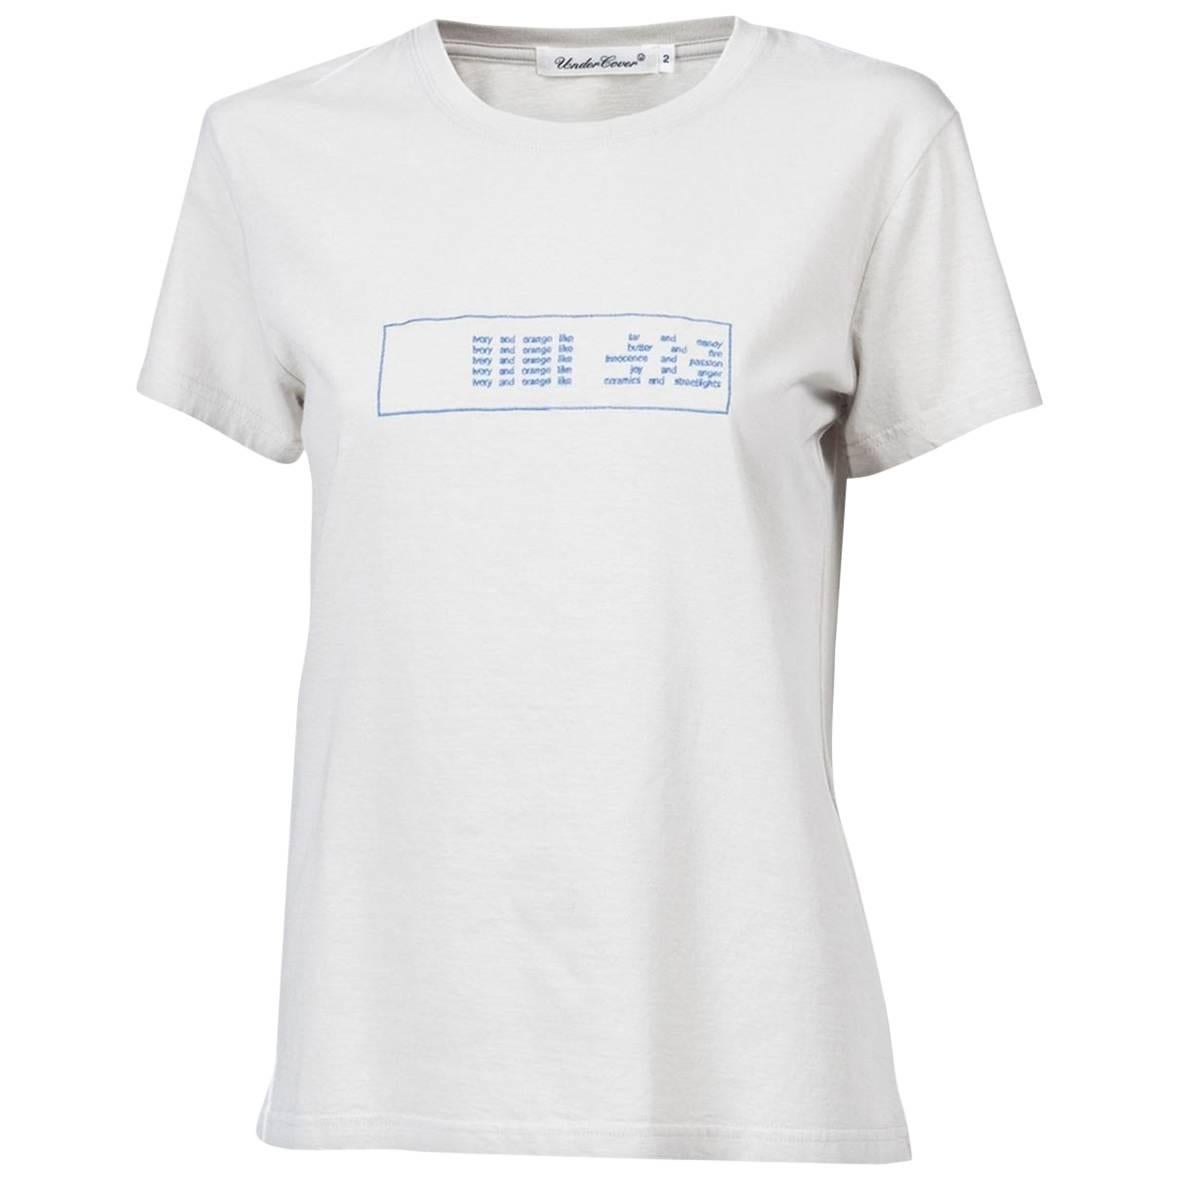 Undercover 'Less But Better' Embroidered T-Shirt For Sale